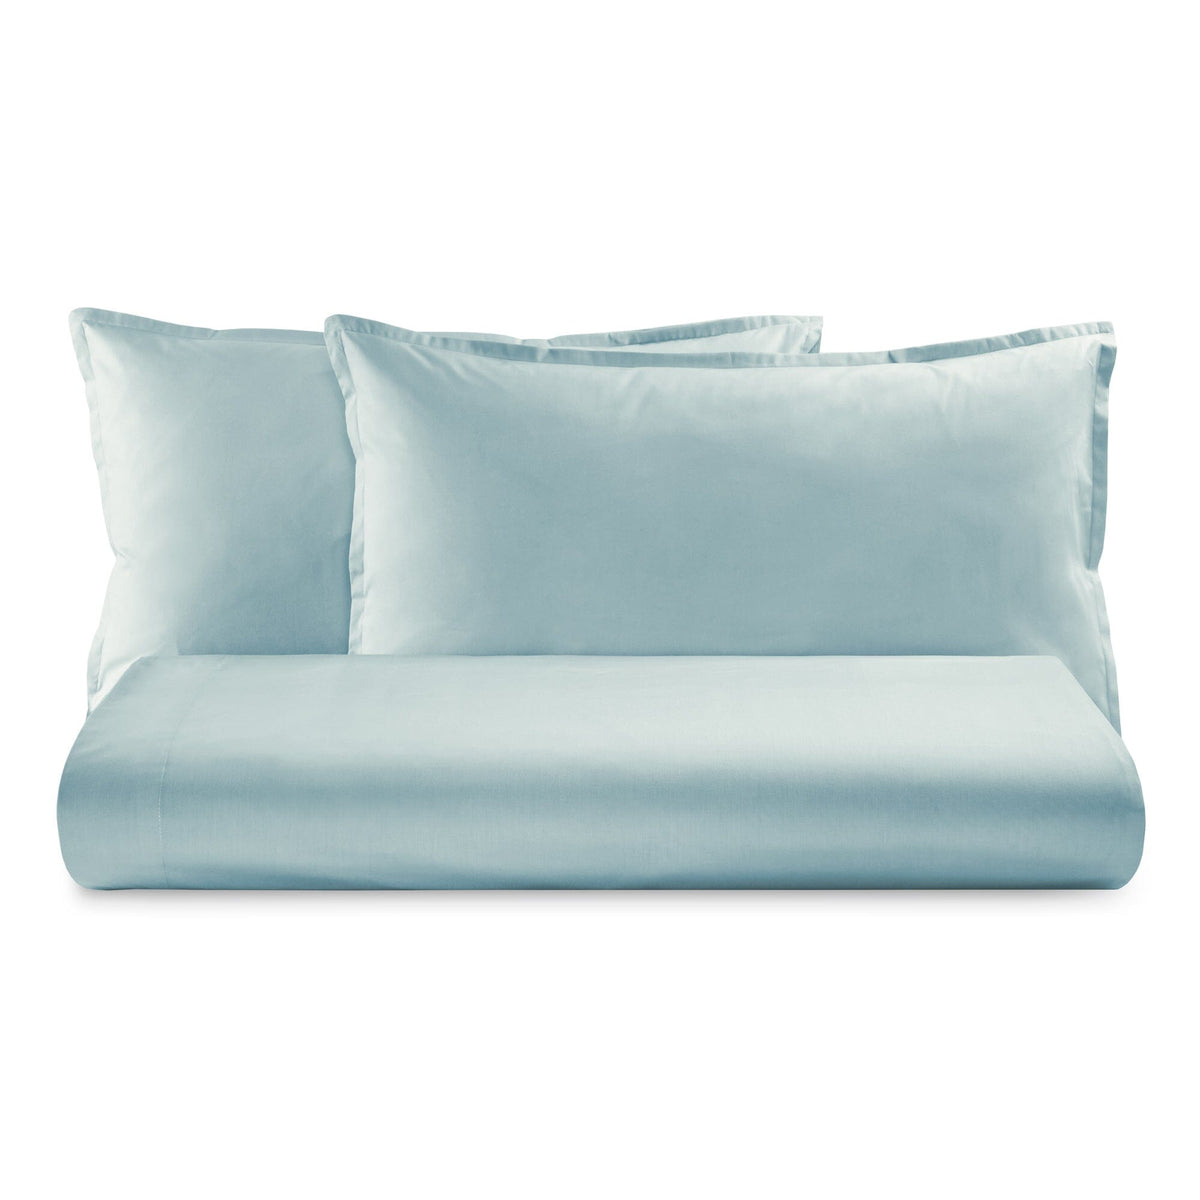 Duvet Cover Set in 200TC Pure Cotton Percale Solid Color - Milano